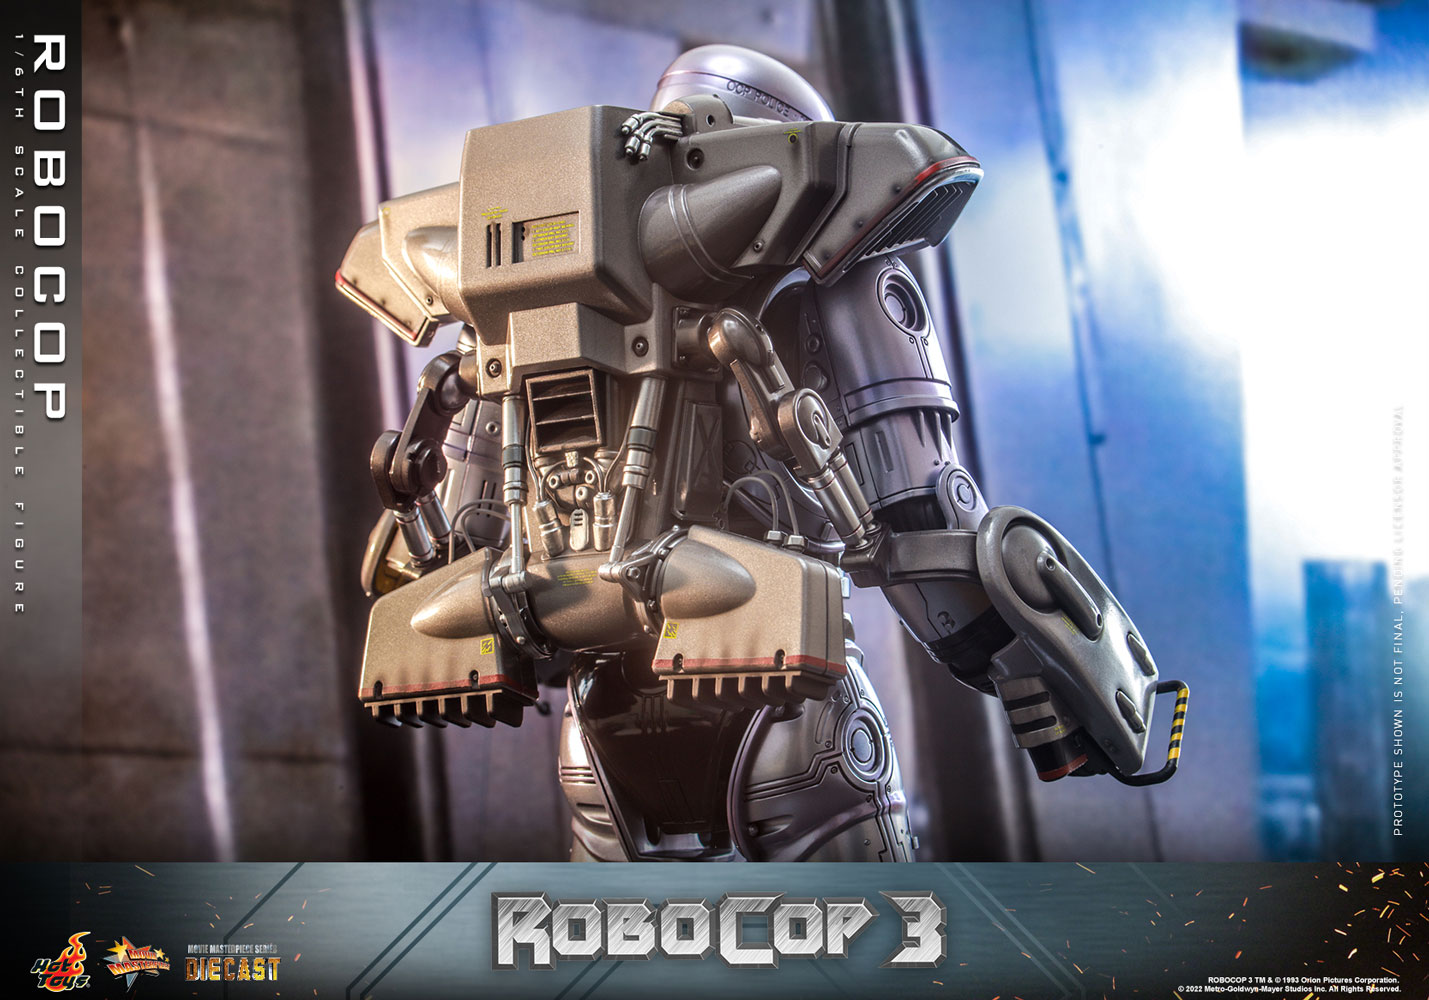 RoboCop Sixth Scale Figure by Hot Toys